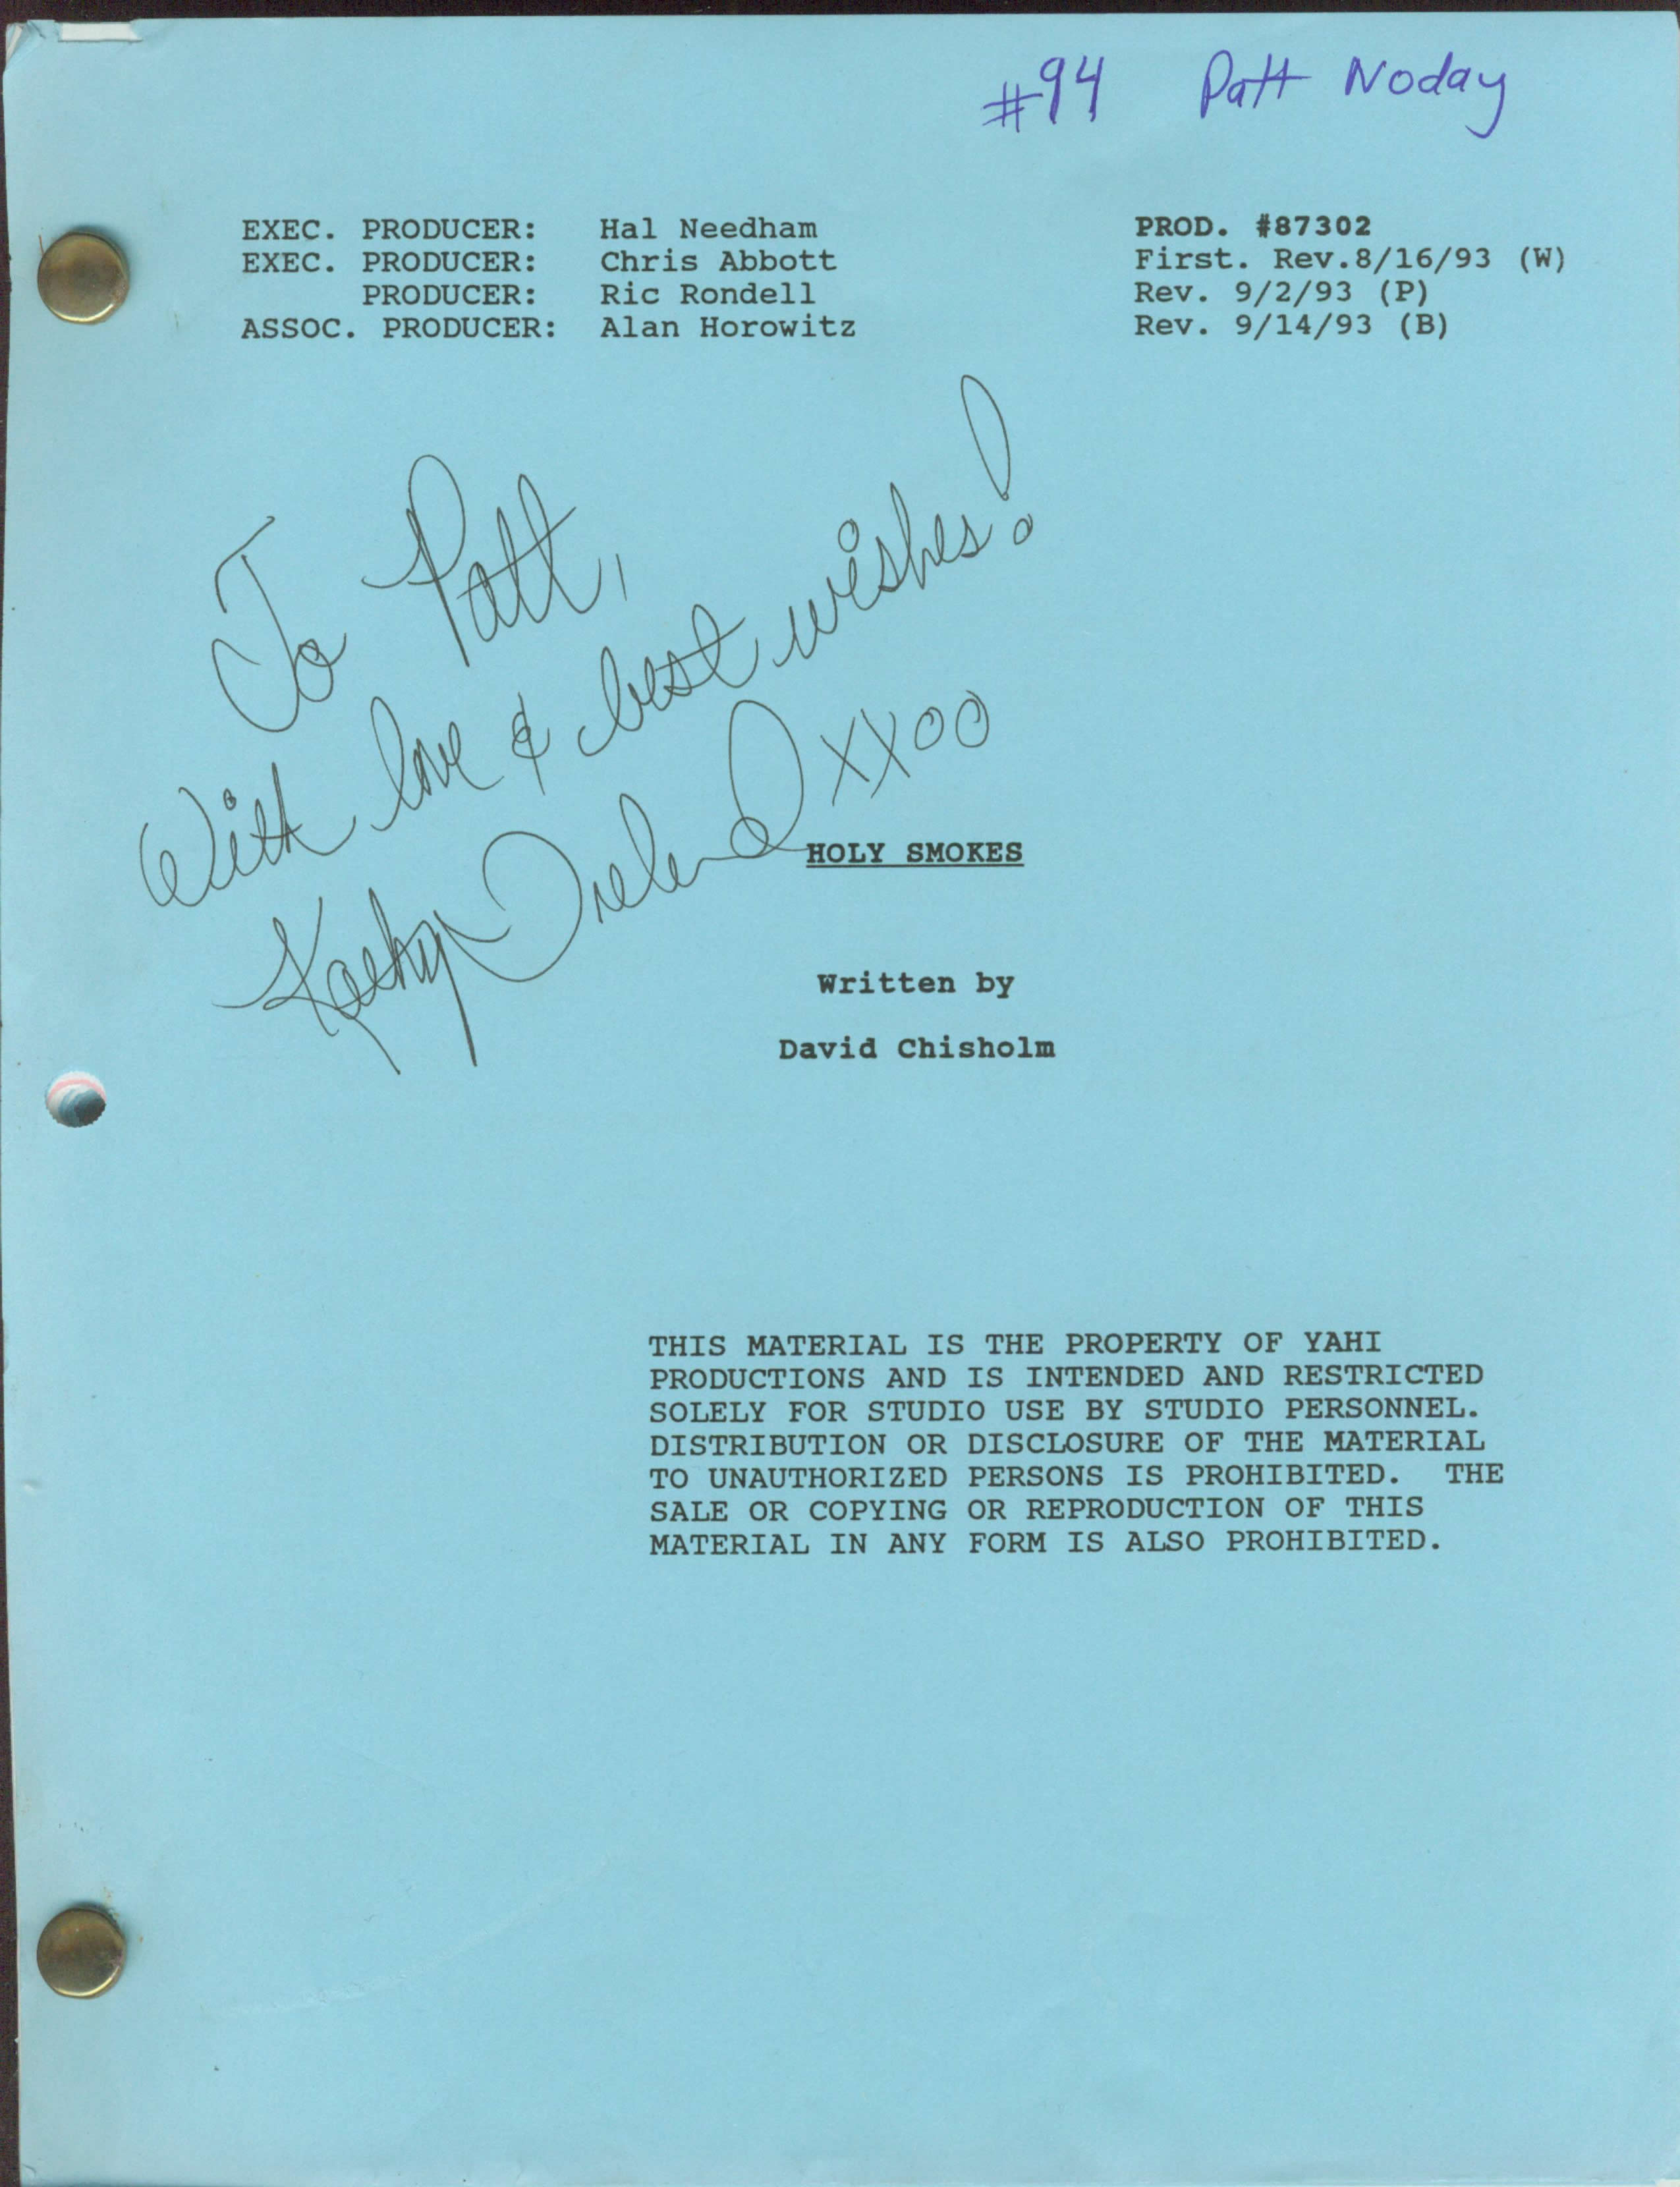 HOLY SMOKES; BEAUTY AND THE BANDIT: Patt Noday: signed script cover for Hal Needham's 